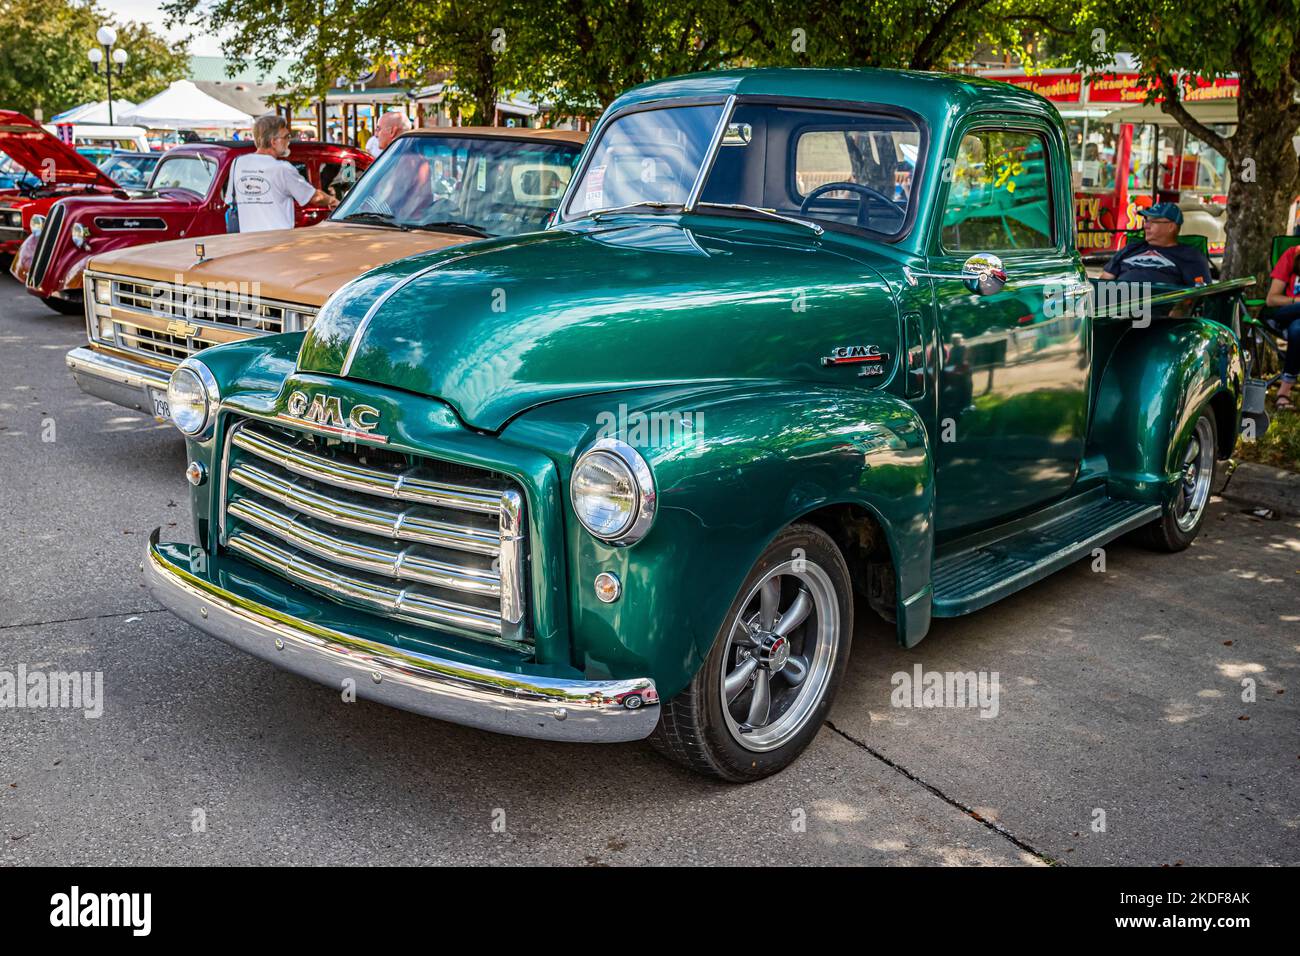 Des Moines, IA - July 01, 2022: High perspective front corner view of a 1949 GMC 100 Half Ton Pickup Truck at a local car show. Stock Photo